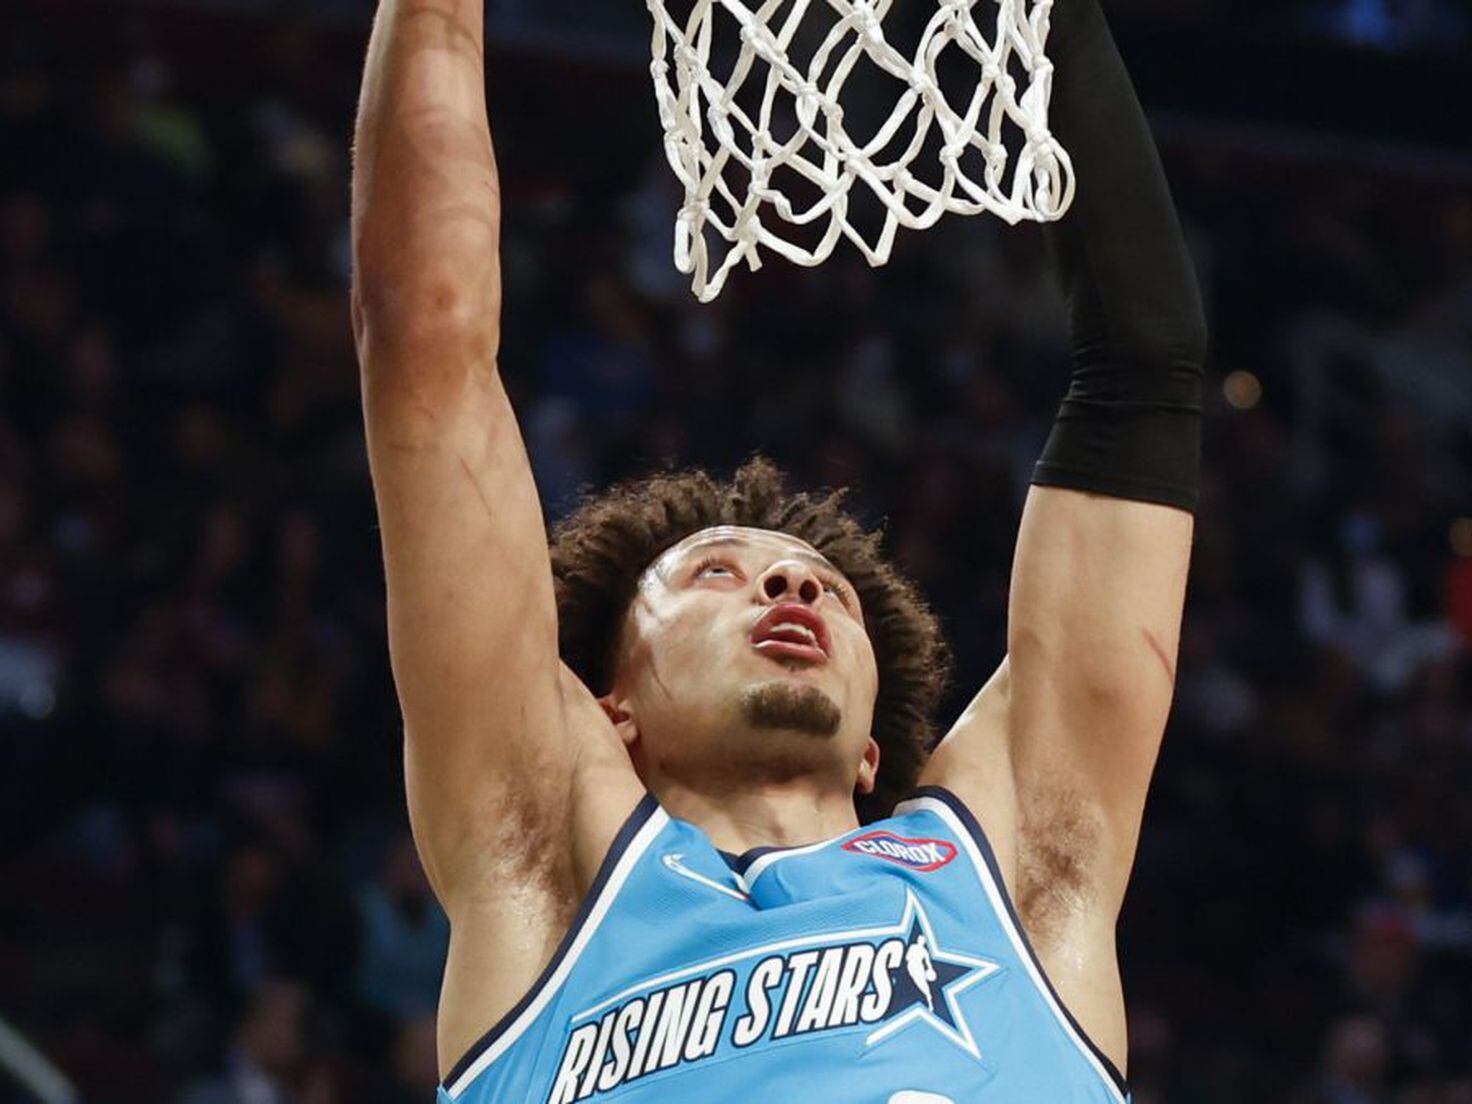 NBA Rising Stars: Cade Cunningham named MVP to lead Team Barry to win